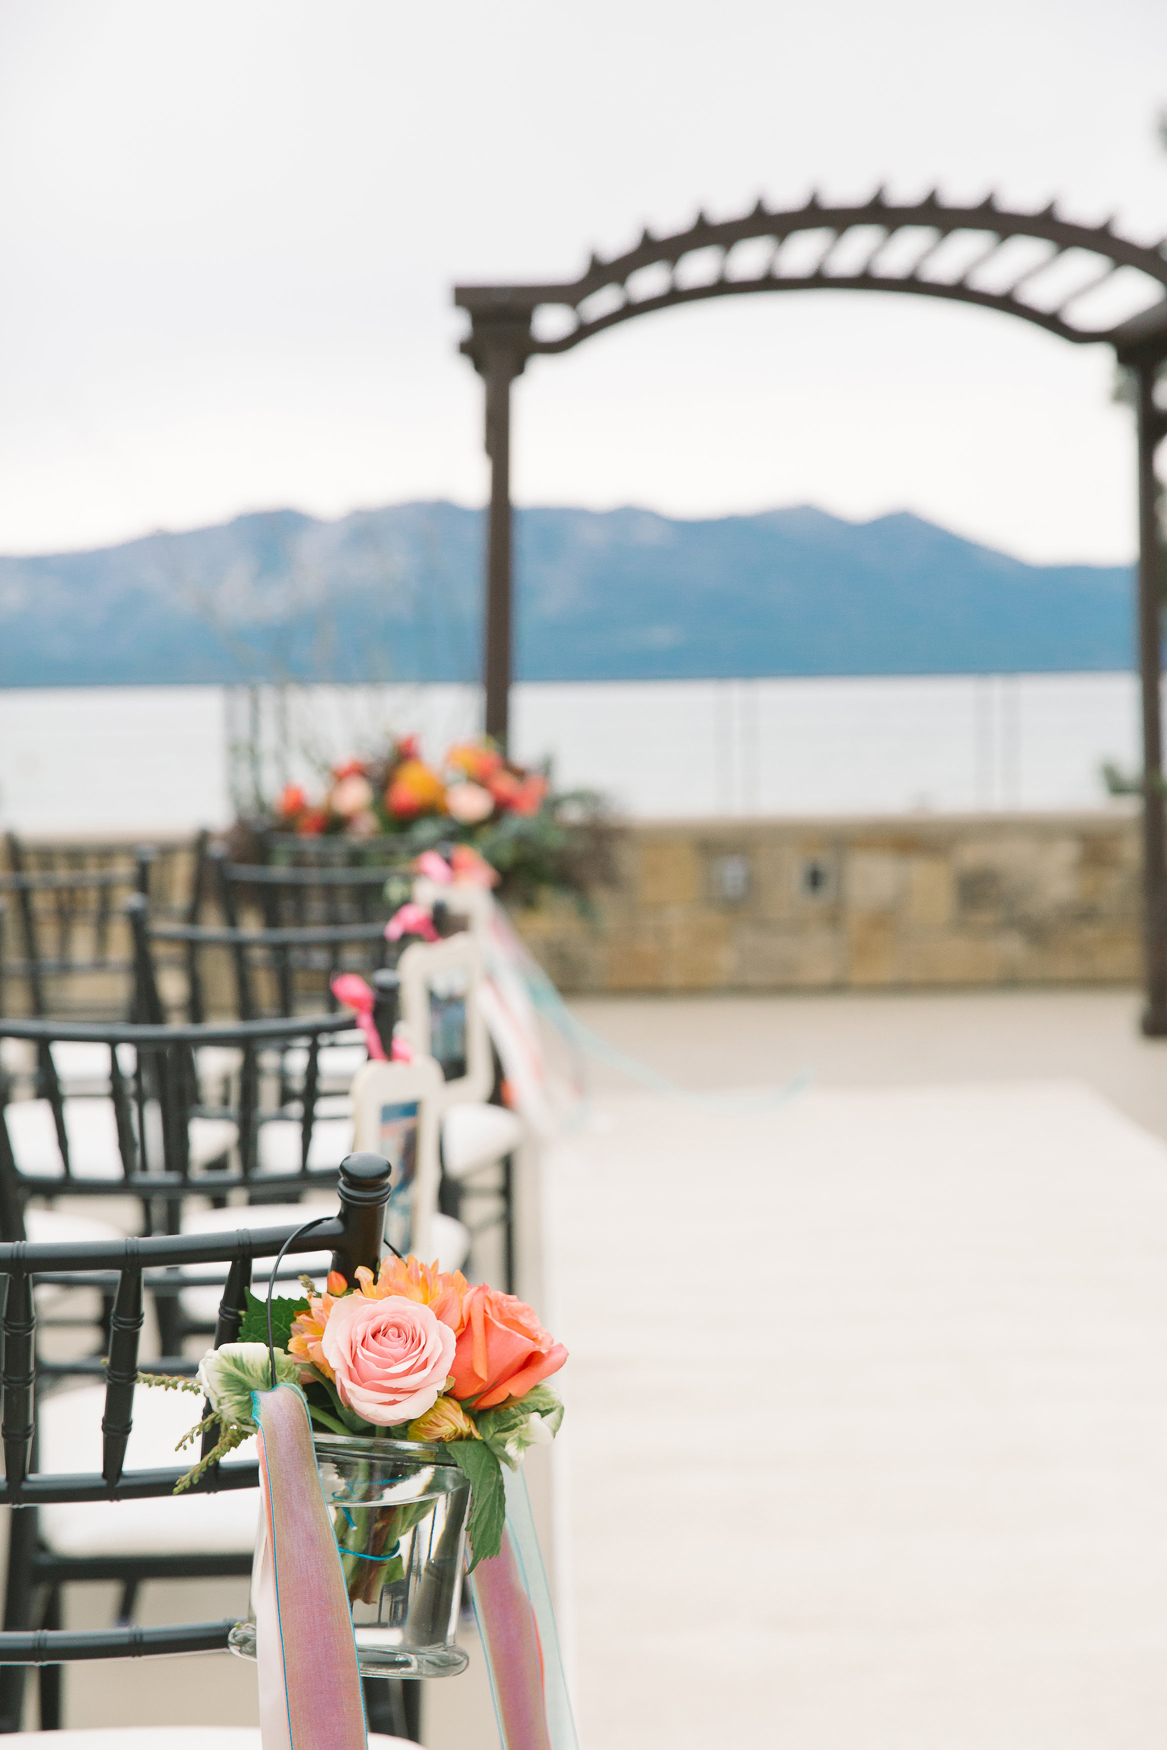 Details like fresh flowers on the aisle personalize The Landing’s luxurious lake-view Rooftop Terrace ceremonies (Photo by Lauren Lindley Photography).